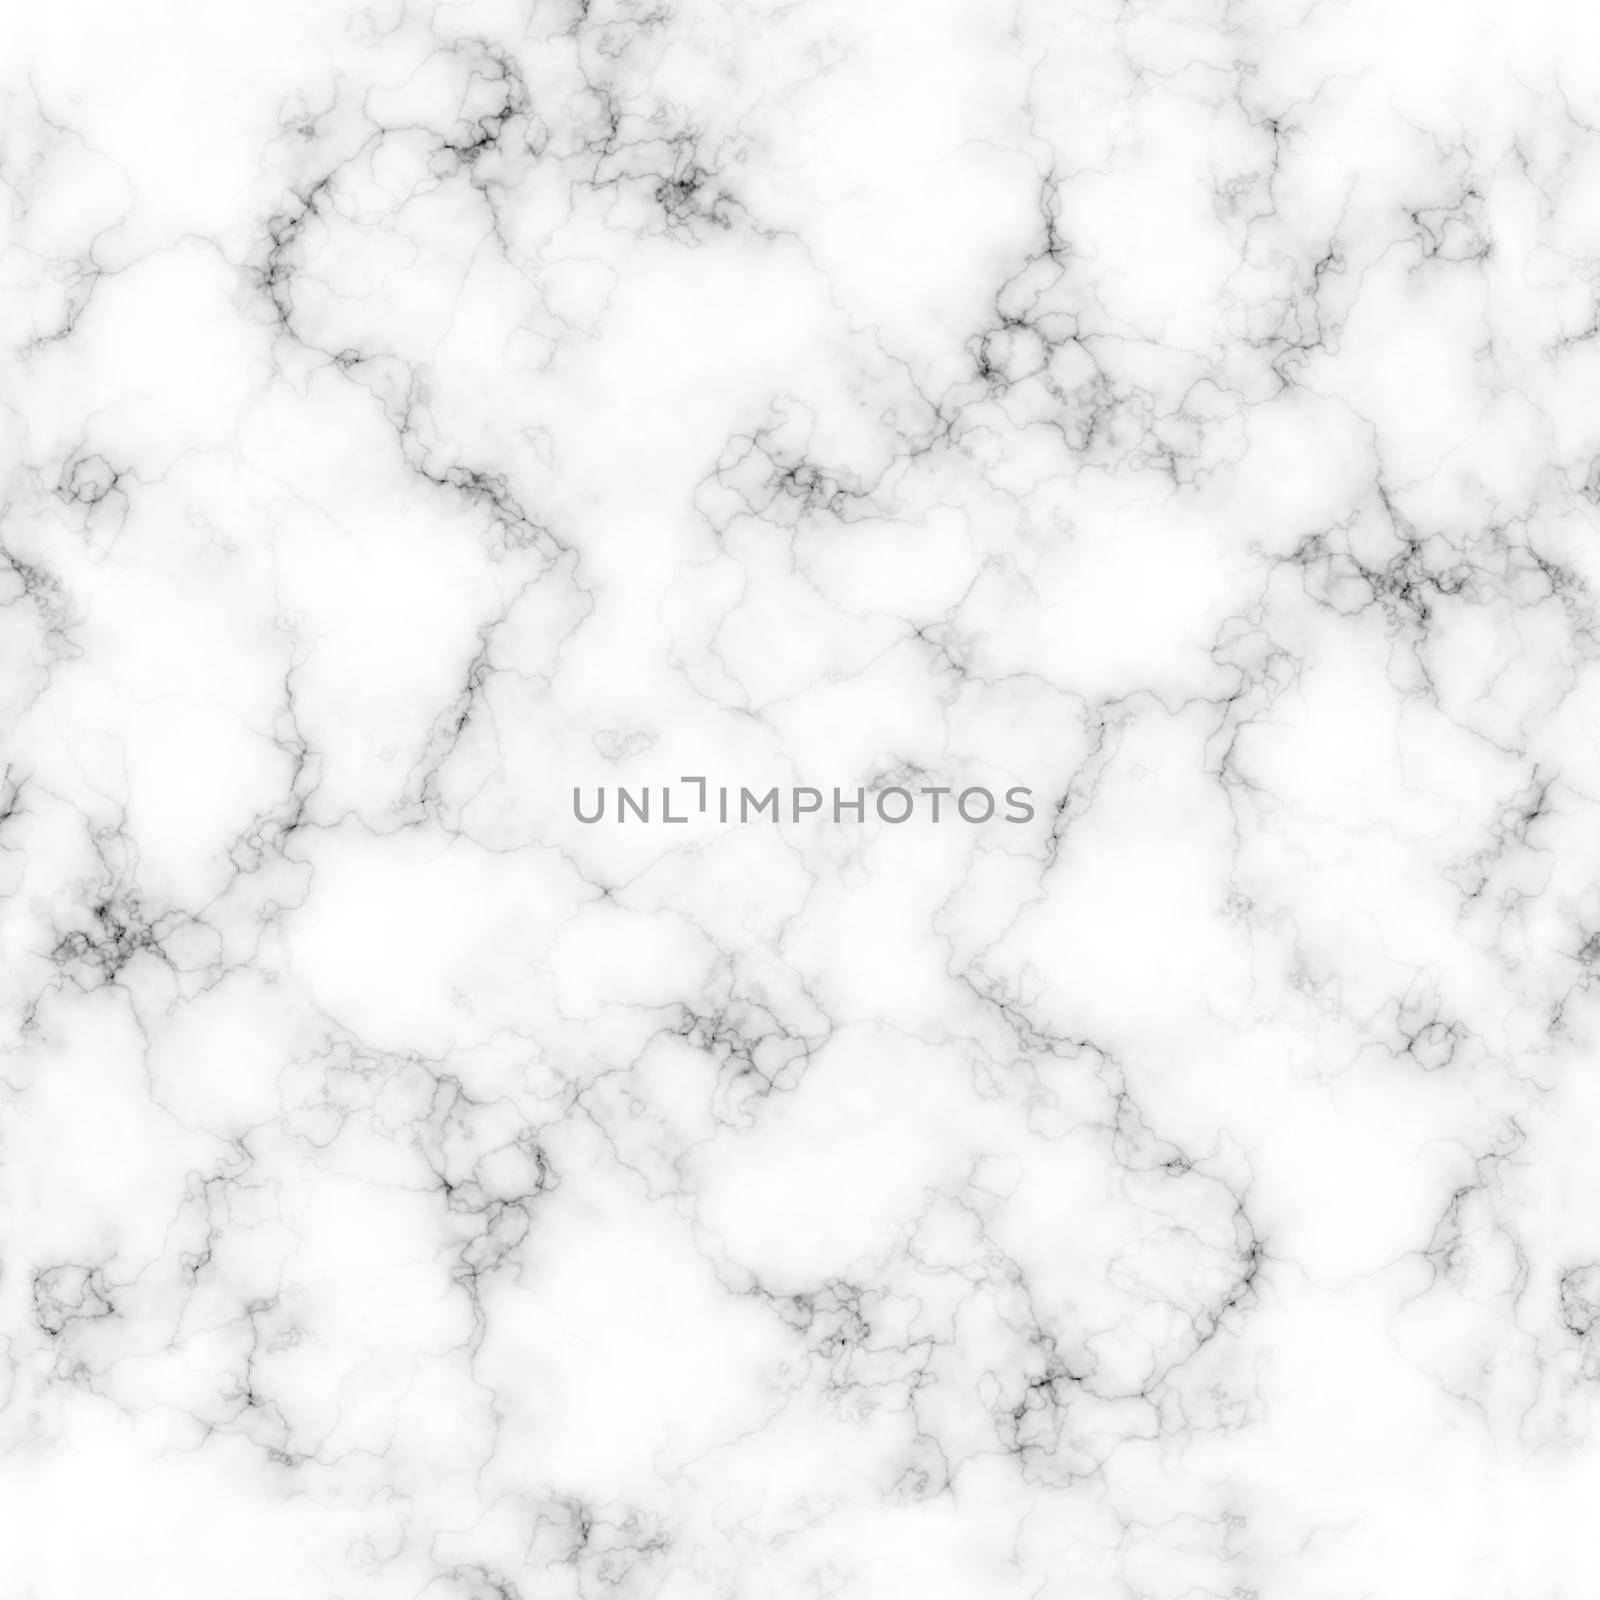 White marble texture pattern background. Realistic marbling effect in white grey colour. illustration